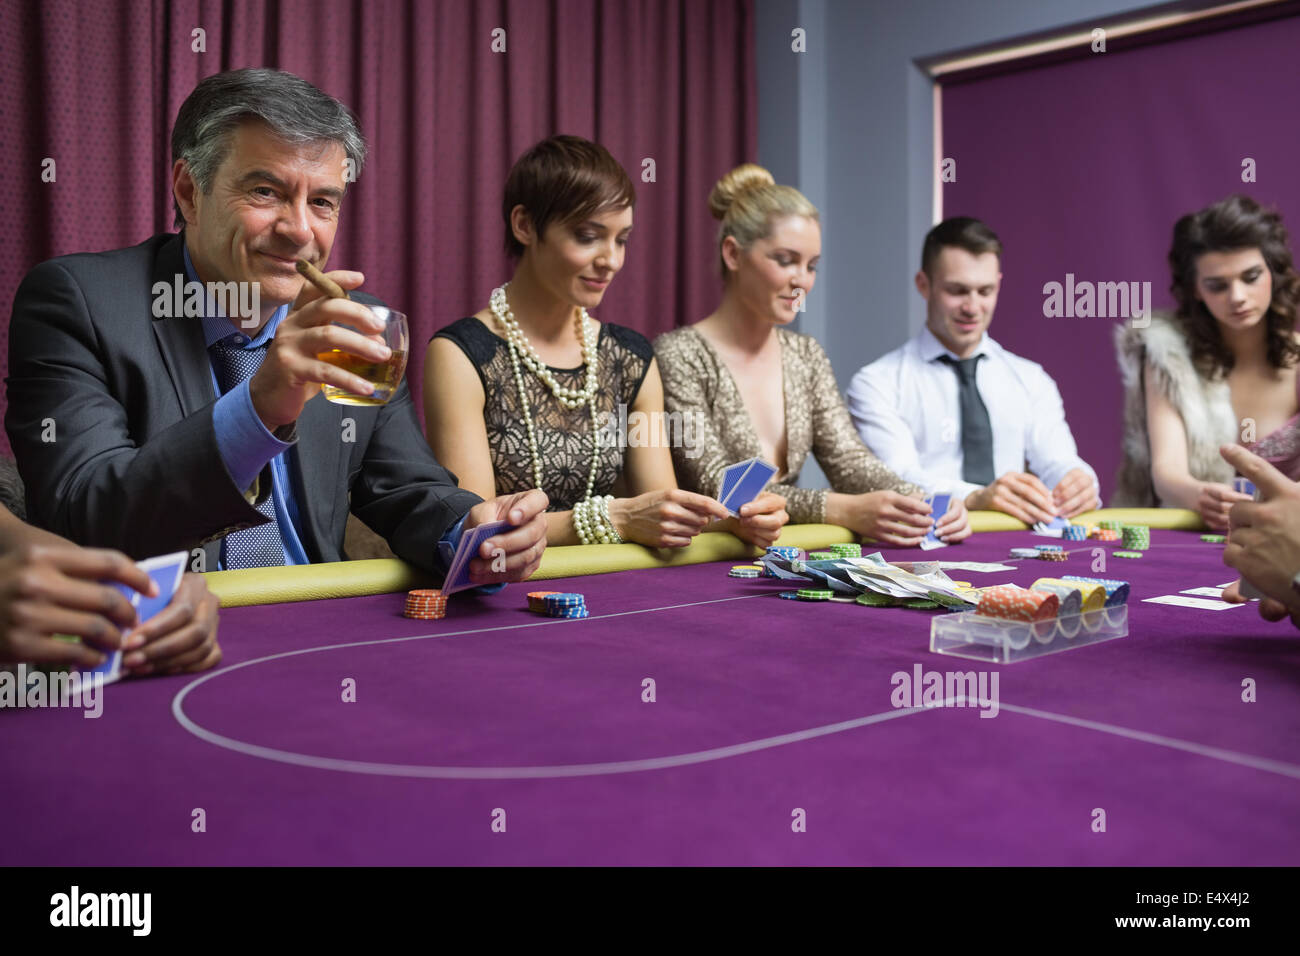 Man with cigar looking up from poker game Stock Photo